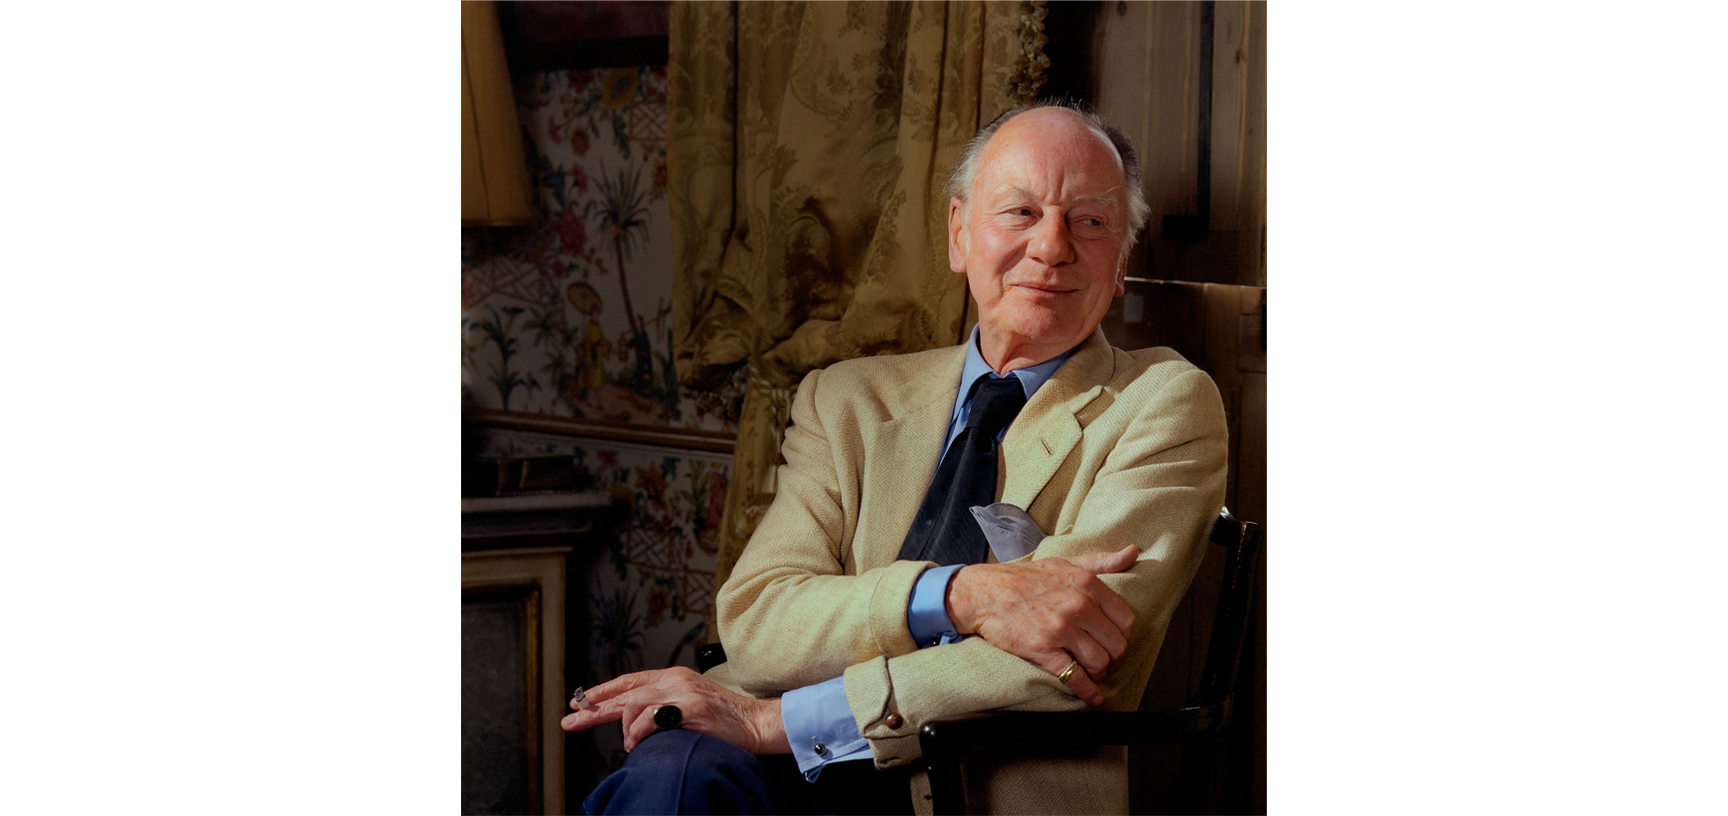 Portrait of John Gielgud - an older white male balding with white hair, dressed in a cream blazer, blue shirt and navy tie, sitting in a wooden chair looking to the right with a tapestry in the background, holding a cigarette in one hand